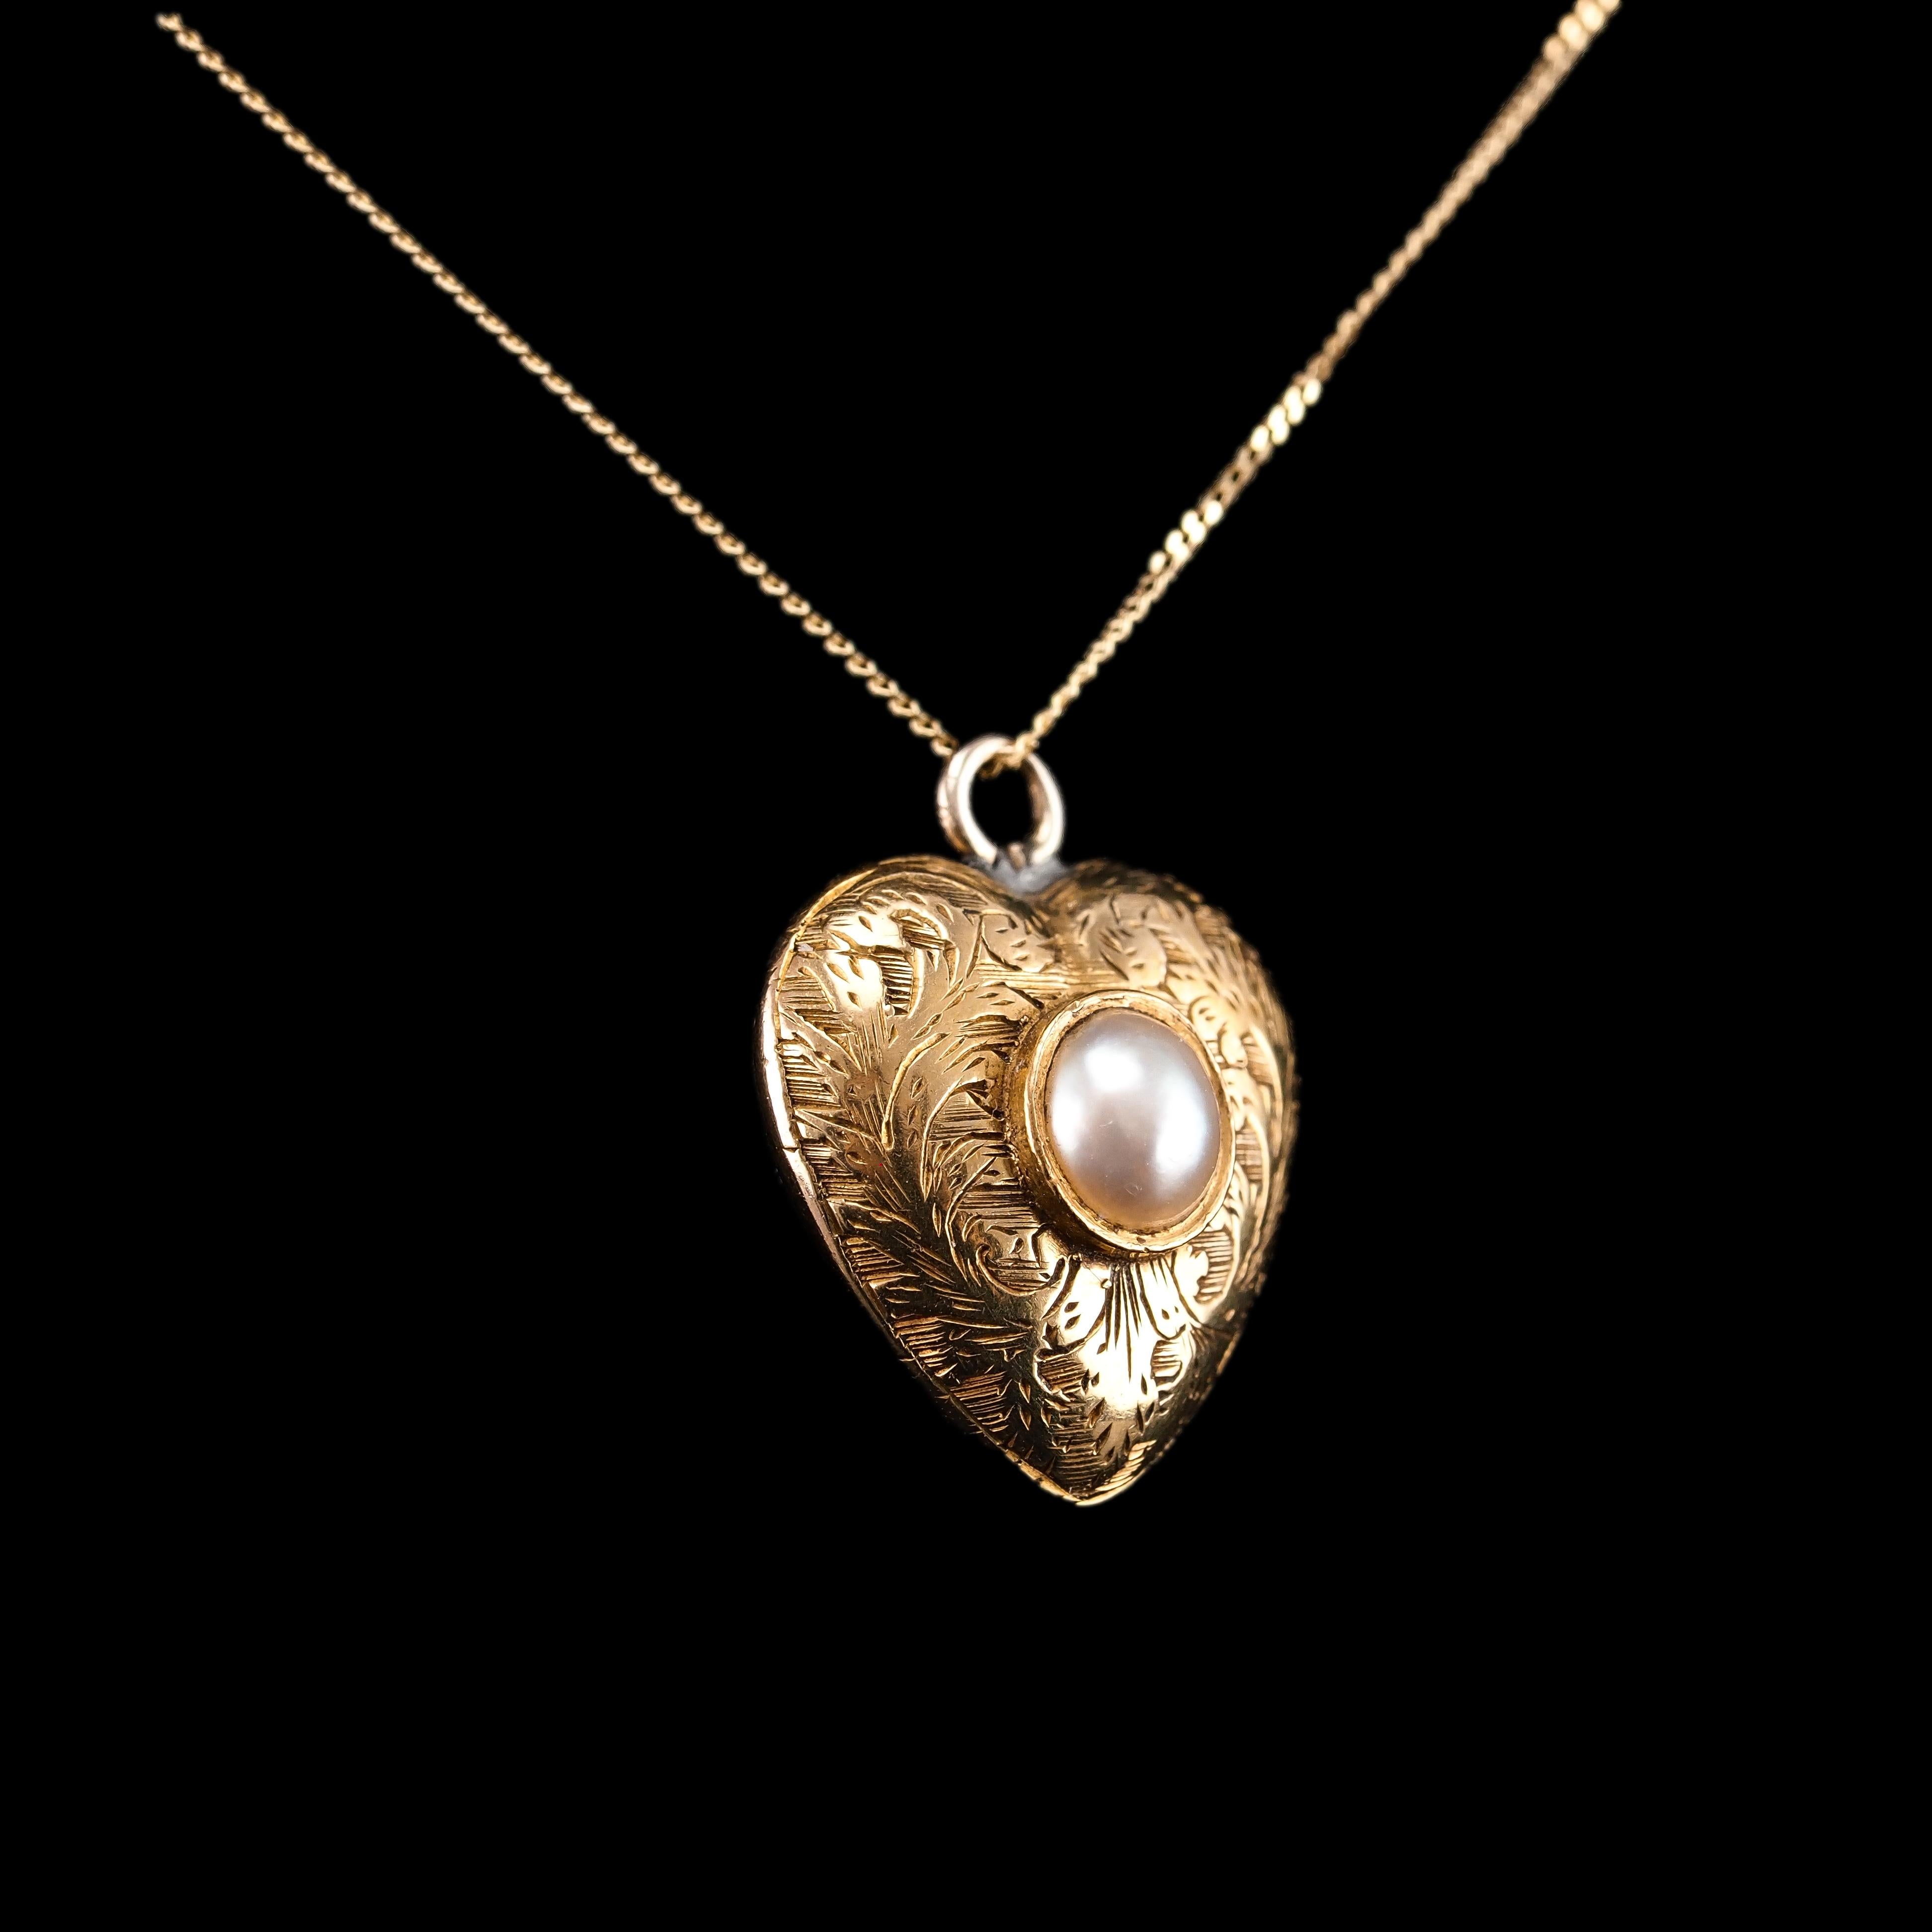 Women's or Men's Antique 18K Gold Heart Charm Pendant Necklace with Pearl - Victorian c.1890